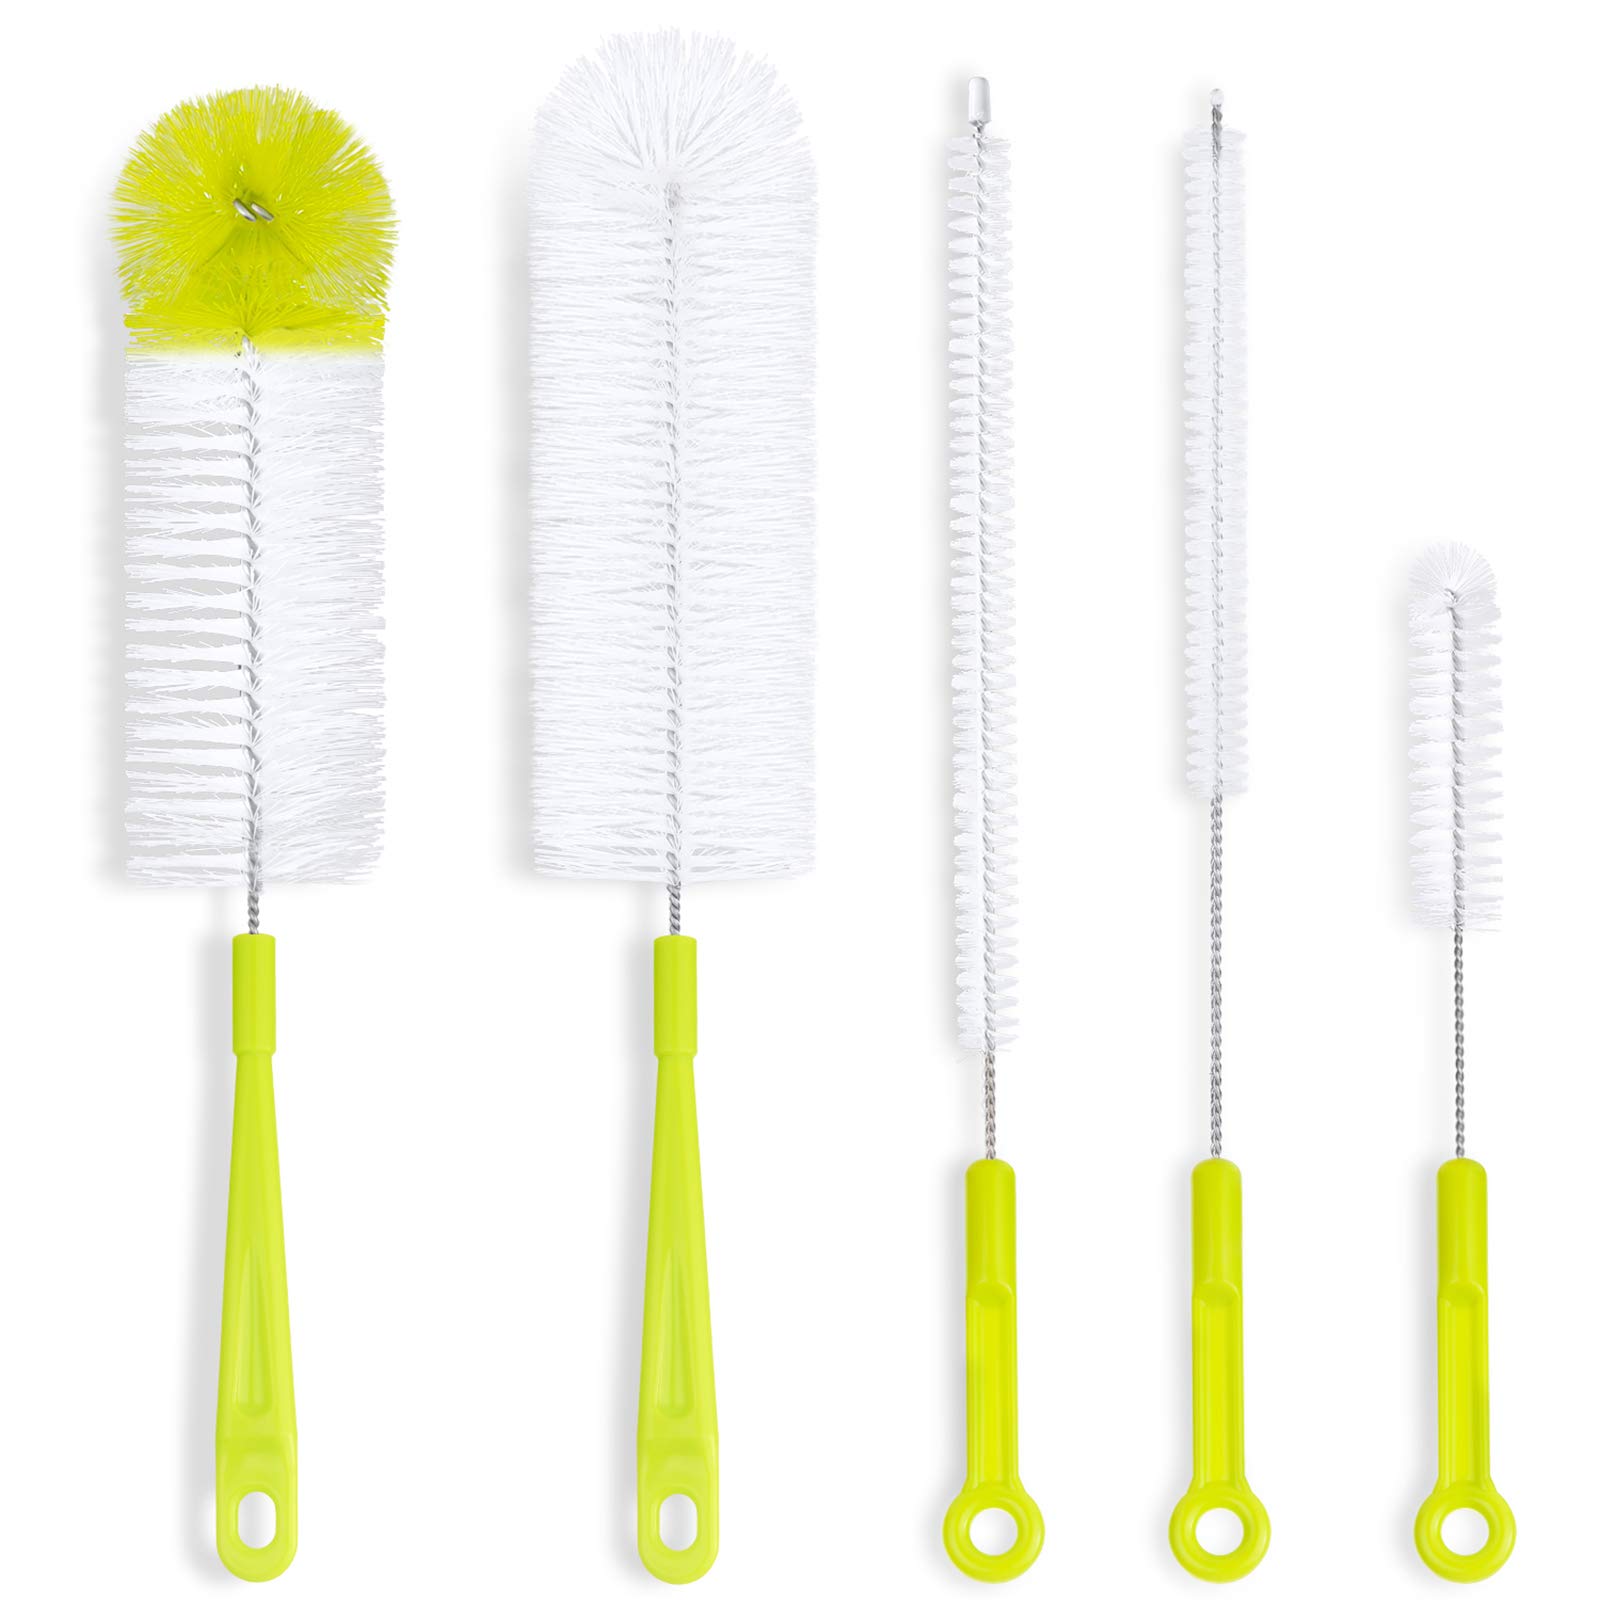 A bottle of cleaning solution or a scrub brush